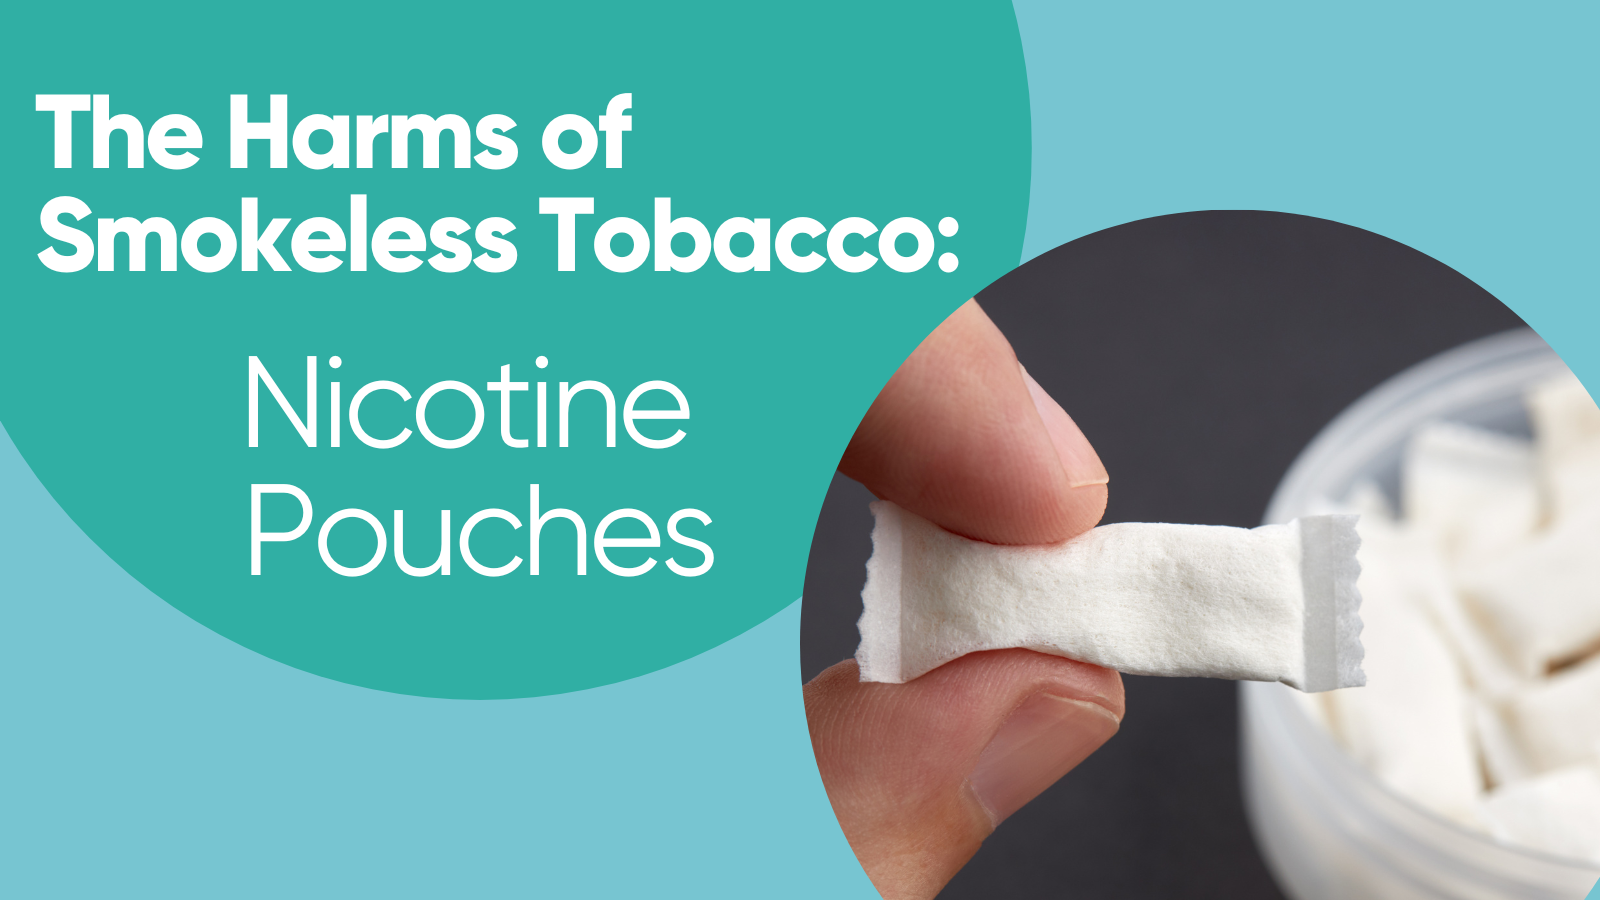 The Harms of Smokeless Tobacco: Nicotine Pouches